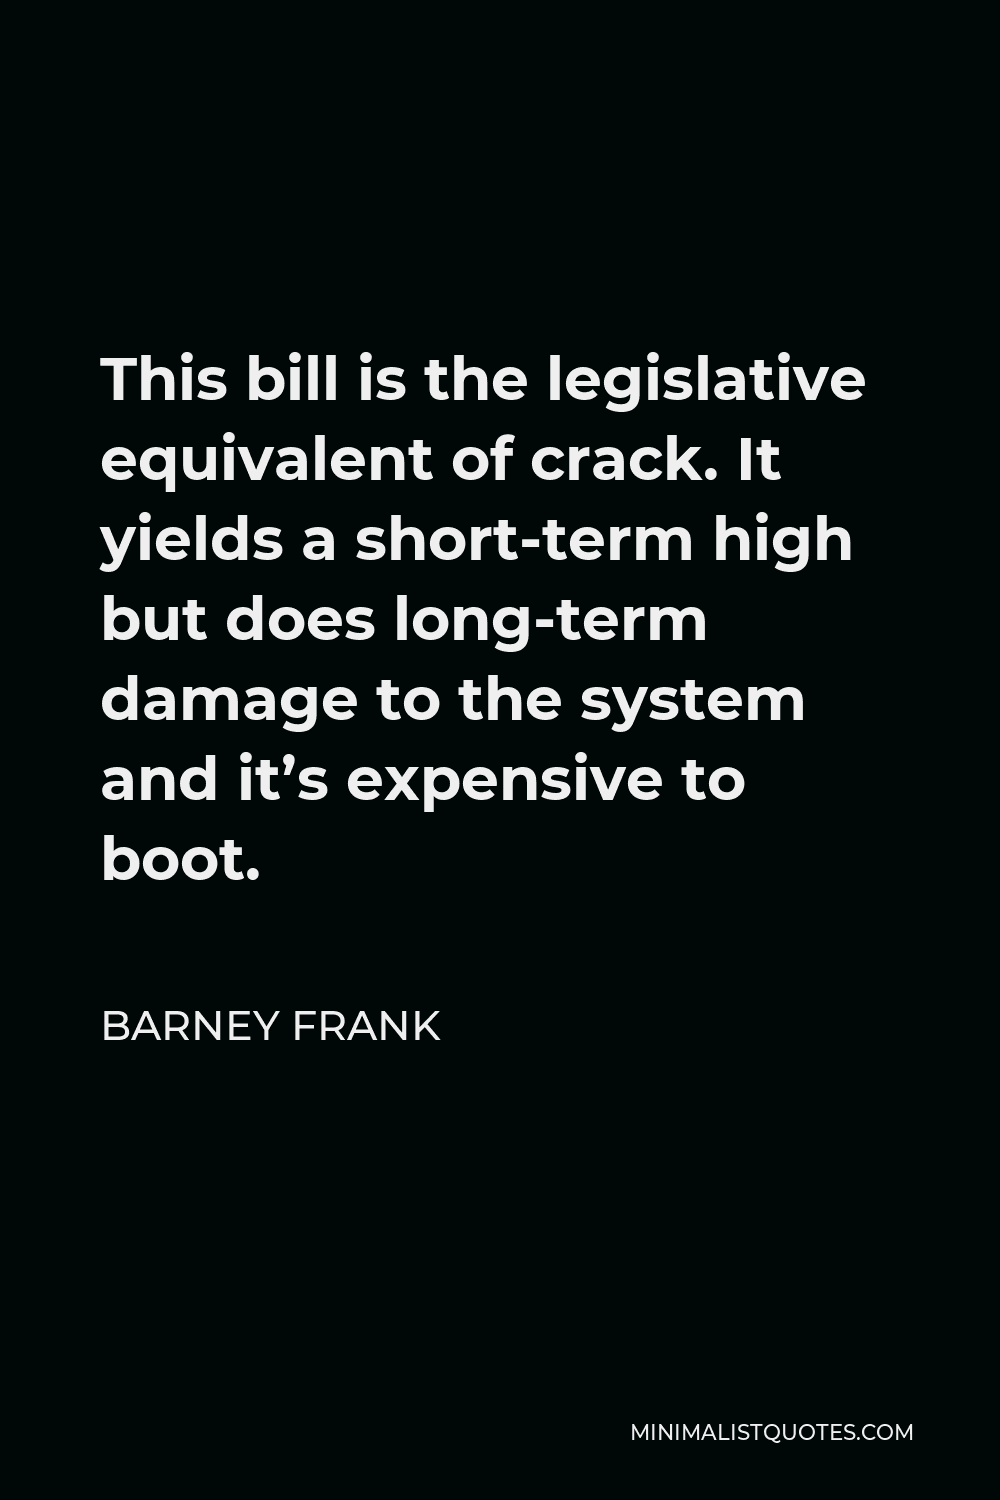 Barney Frank Quote - This bill is the legislative equivalent of crack. It yields a short-term high but does long-term damage to the system and it’s expensive to boot.